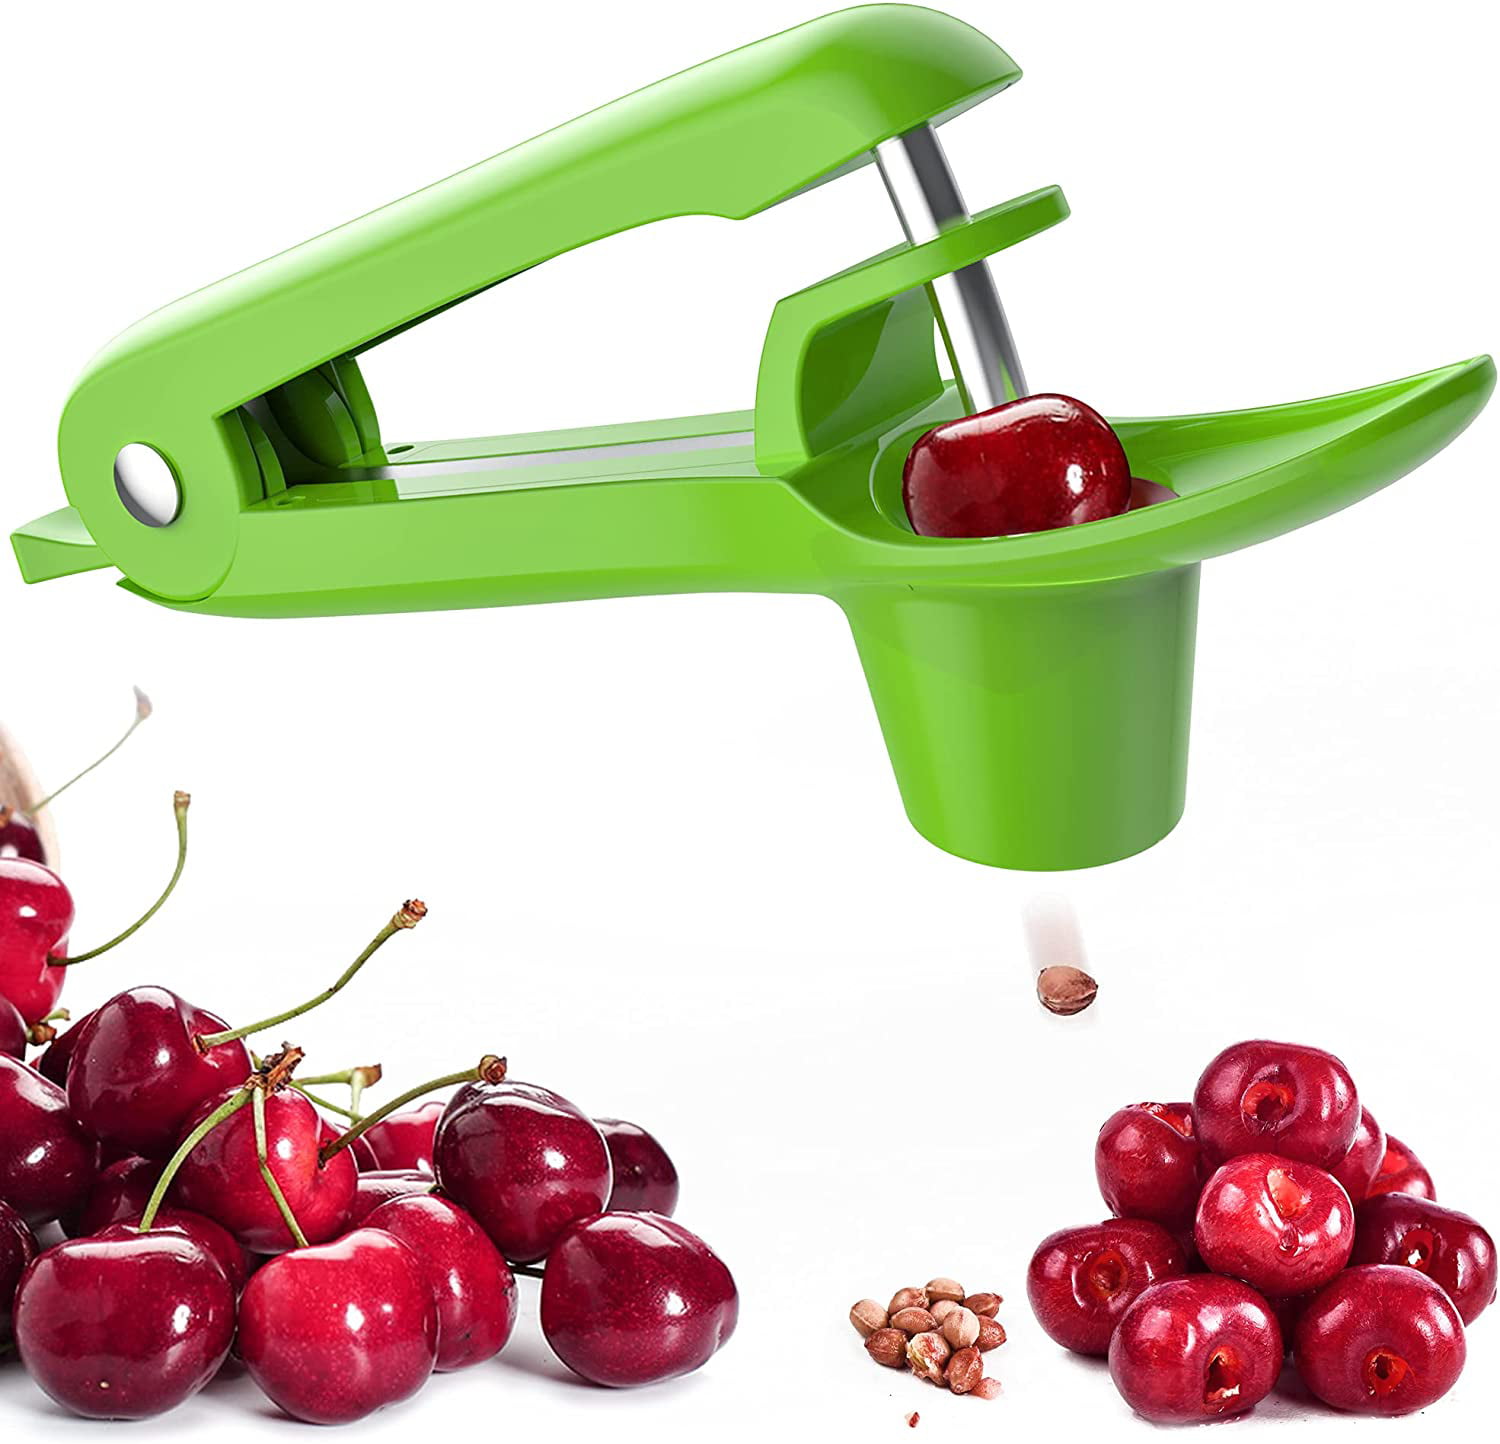 Color:Silver Cherry Pitter Stainless Steel Jujube Corer Tool Olive Cherry Stoner Pitter Olive Tool Professional Cherry Stoner Seed Remover 